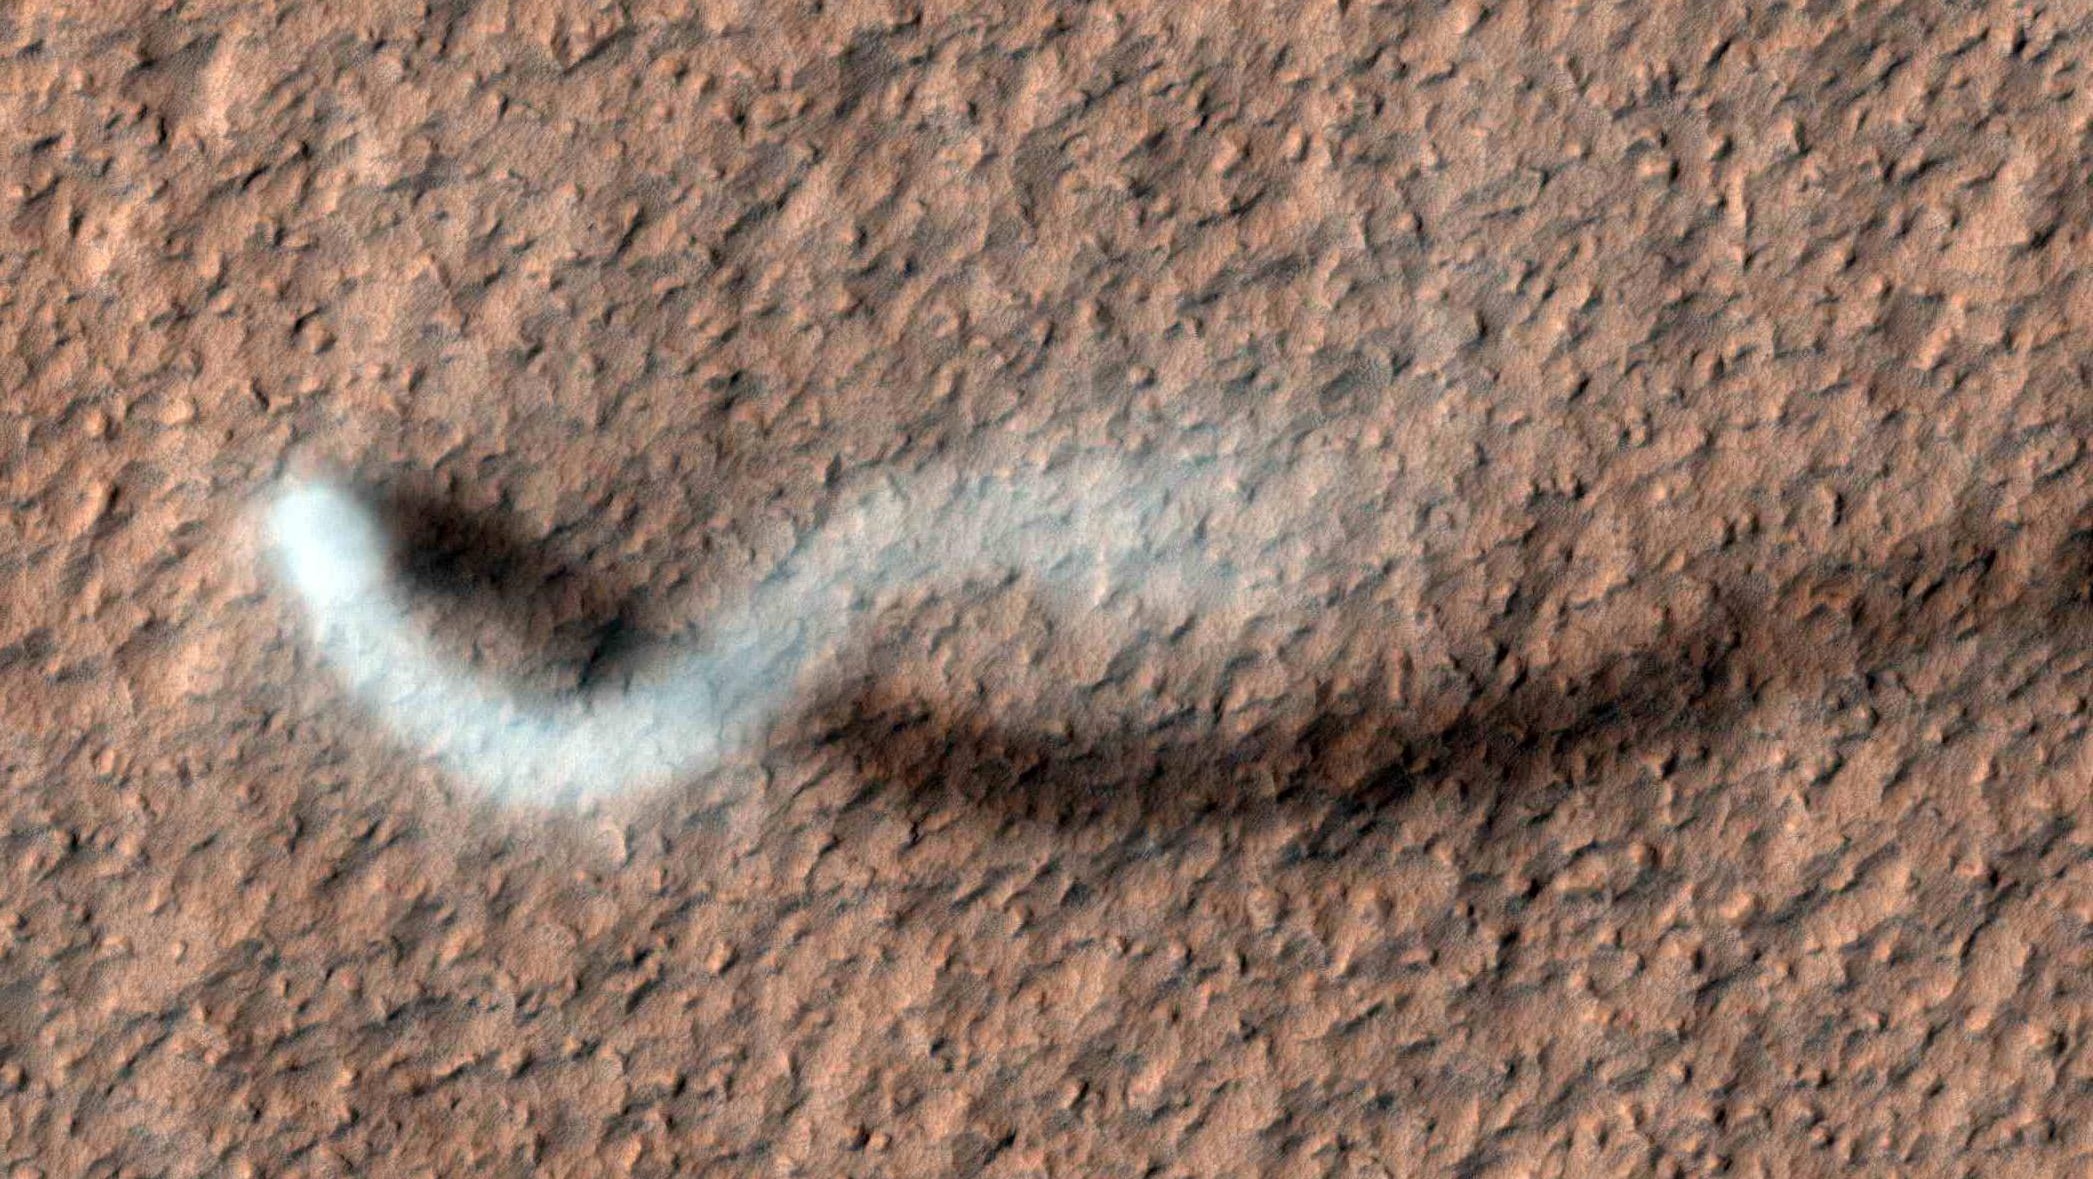 With eyes on Mars, NASA algorithm tackles dust devils on Earth